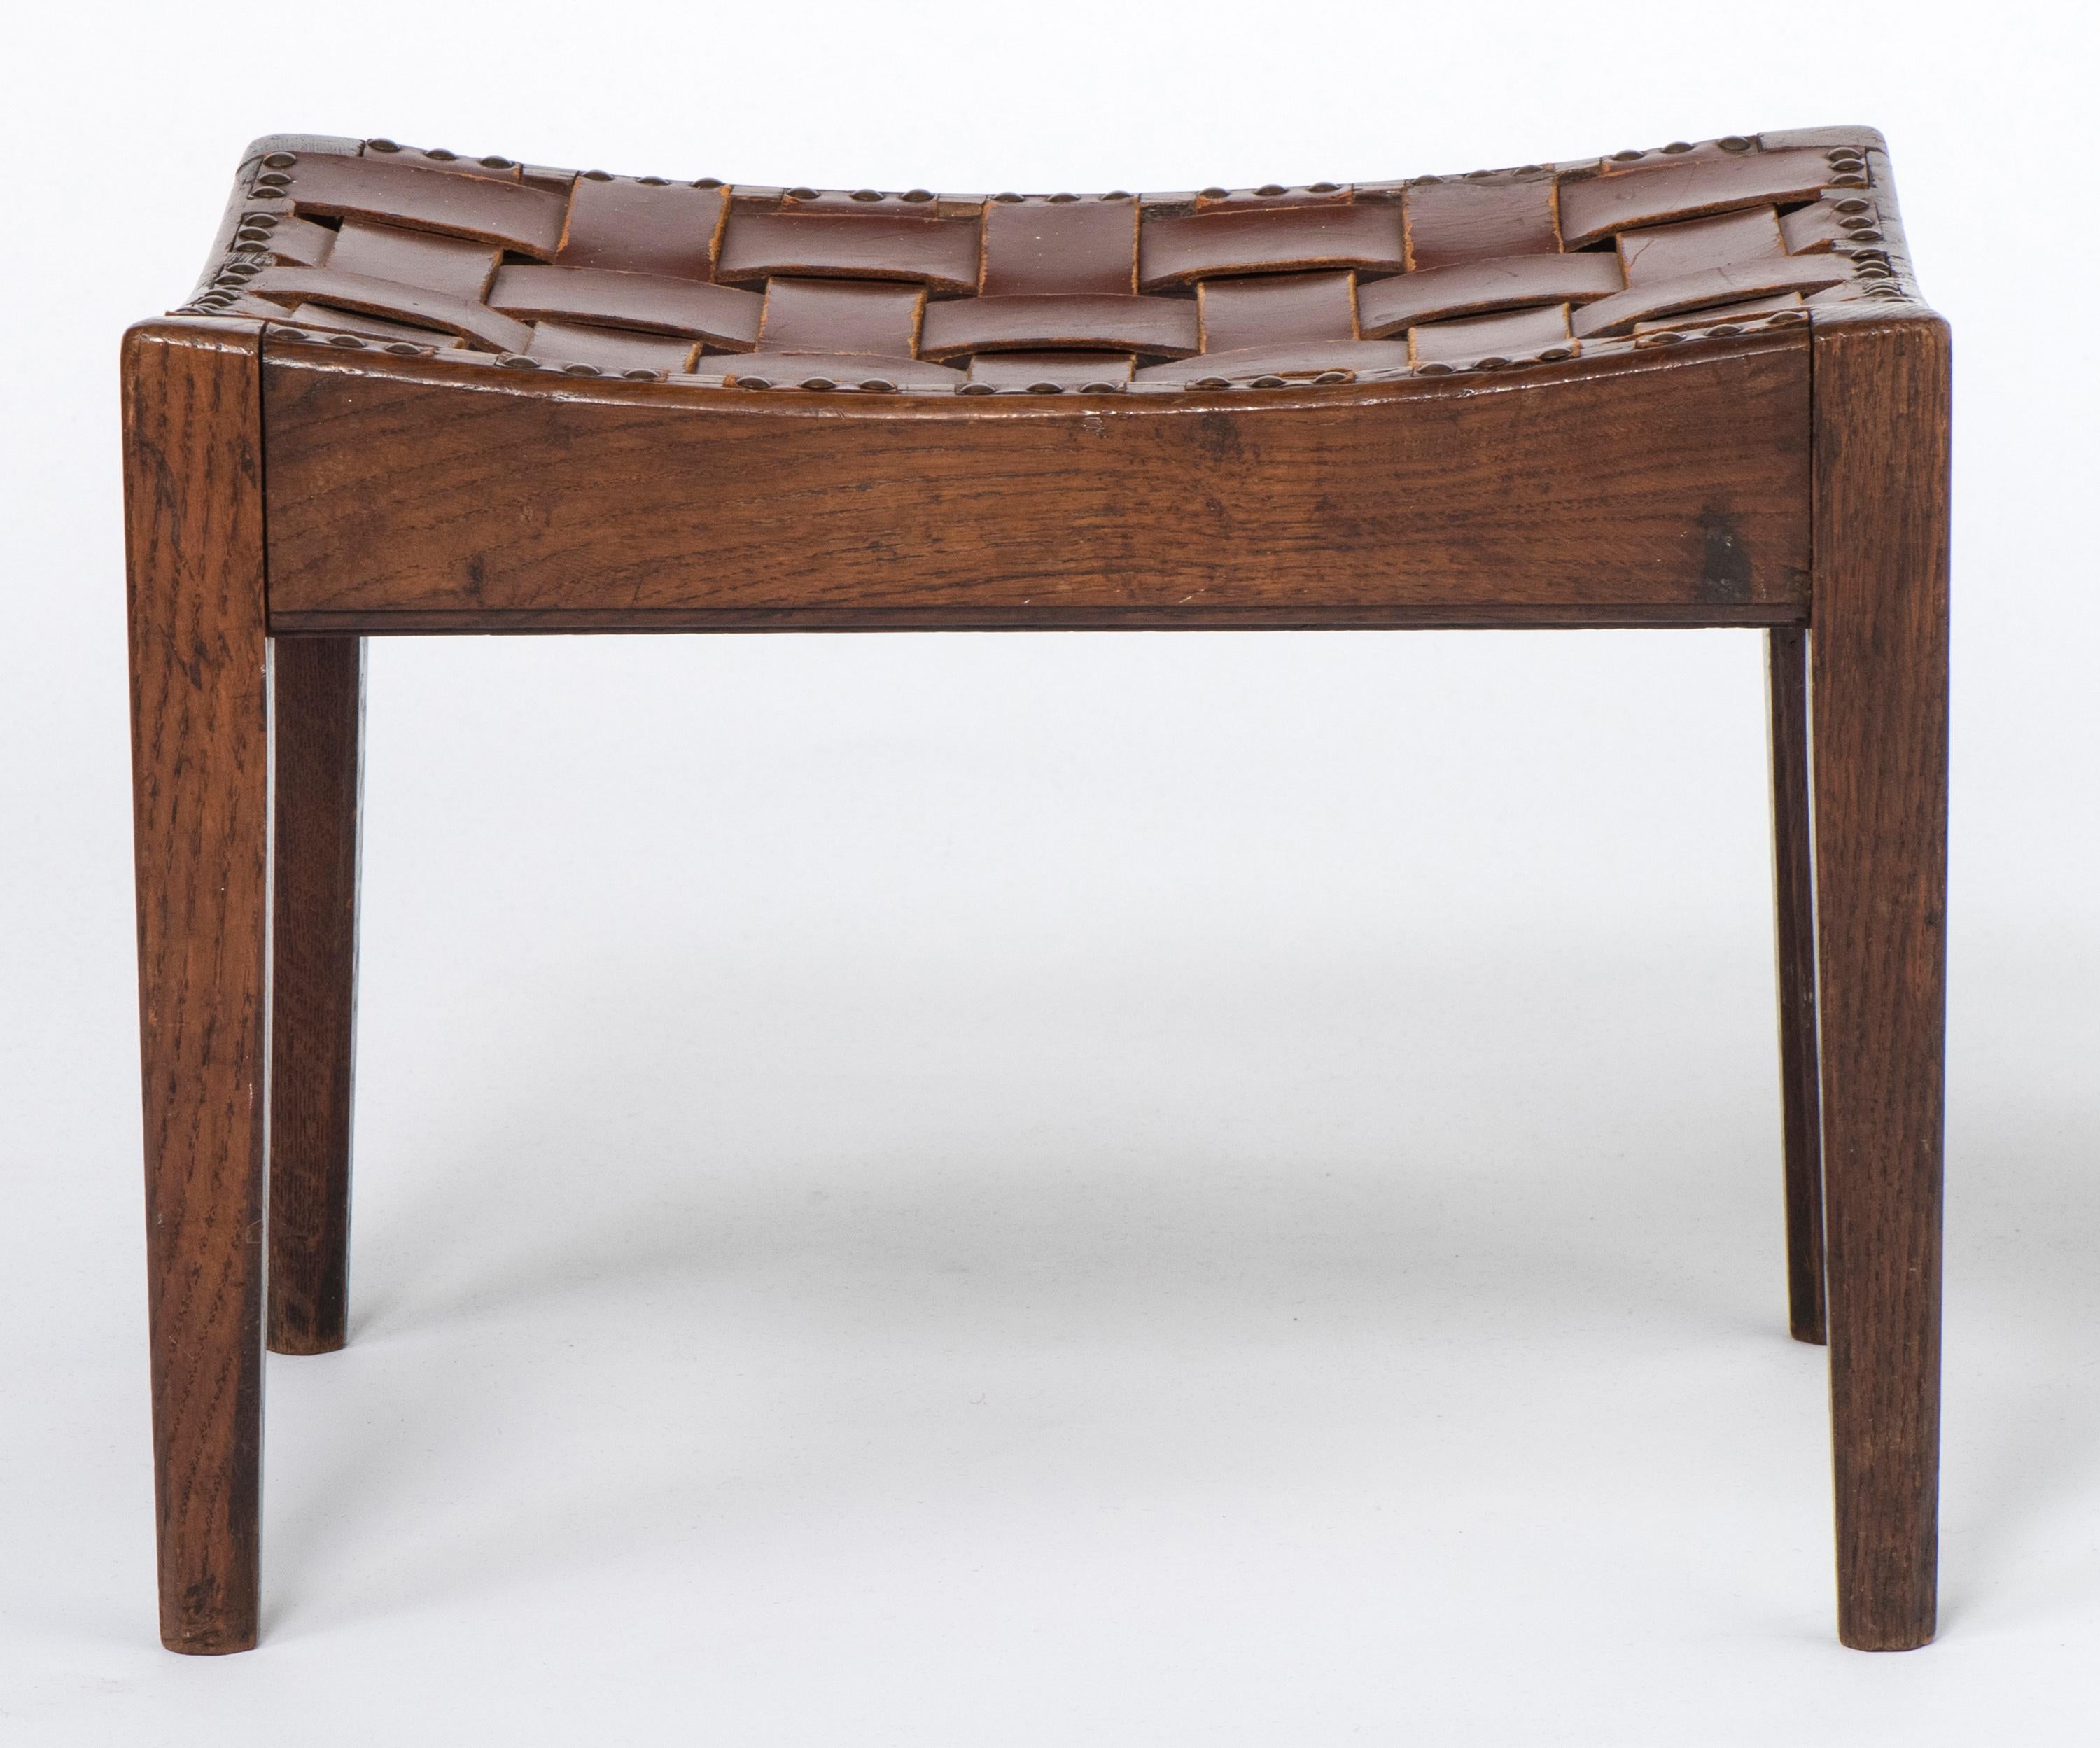 Oak stool by Arthur W Simpson of Kendal. (1854-1922)
Of simple rectangular concave seats with leather slatted tops.
Tapering legs.
Labelled “Arthur Simpson The Handicrafts Kendal”
England, circa 1920.
Measures: 40 cm wide x 30.5 cm deep x 30.5